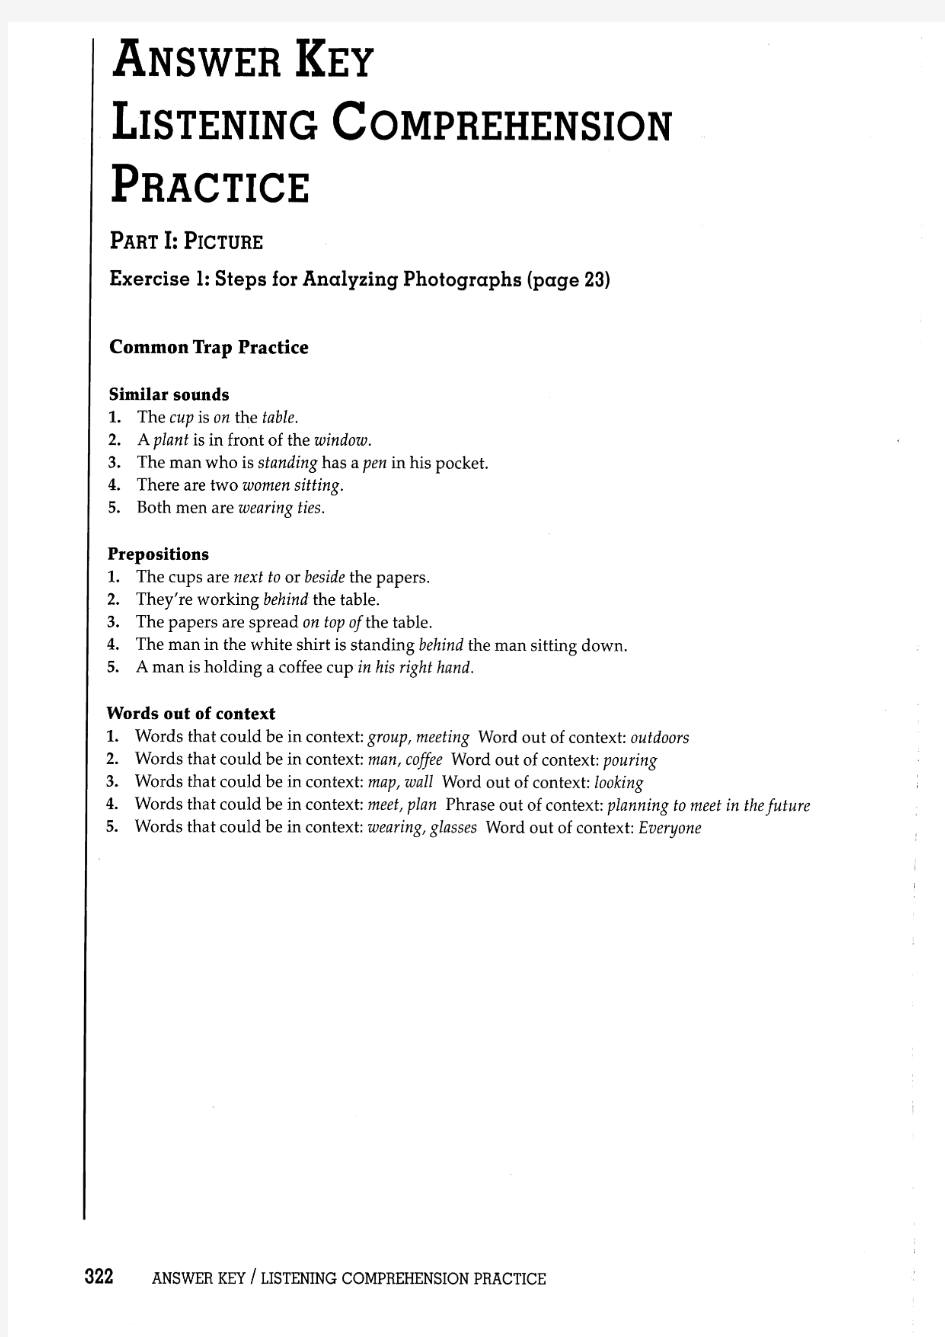 Longman Preparation Series for the TOEIC Test - Advanced Course - 3rd Edition (answer keys)